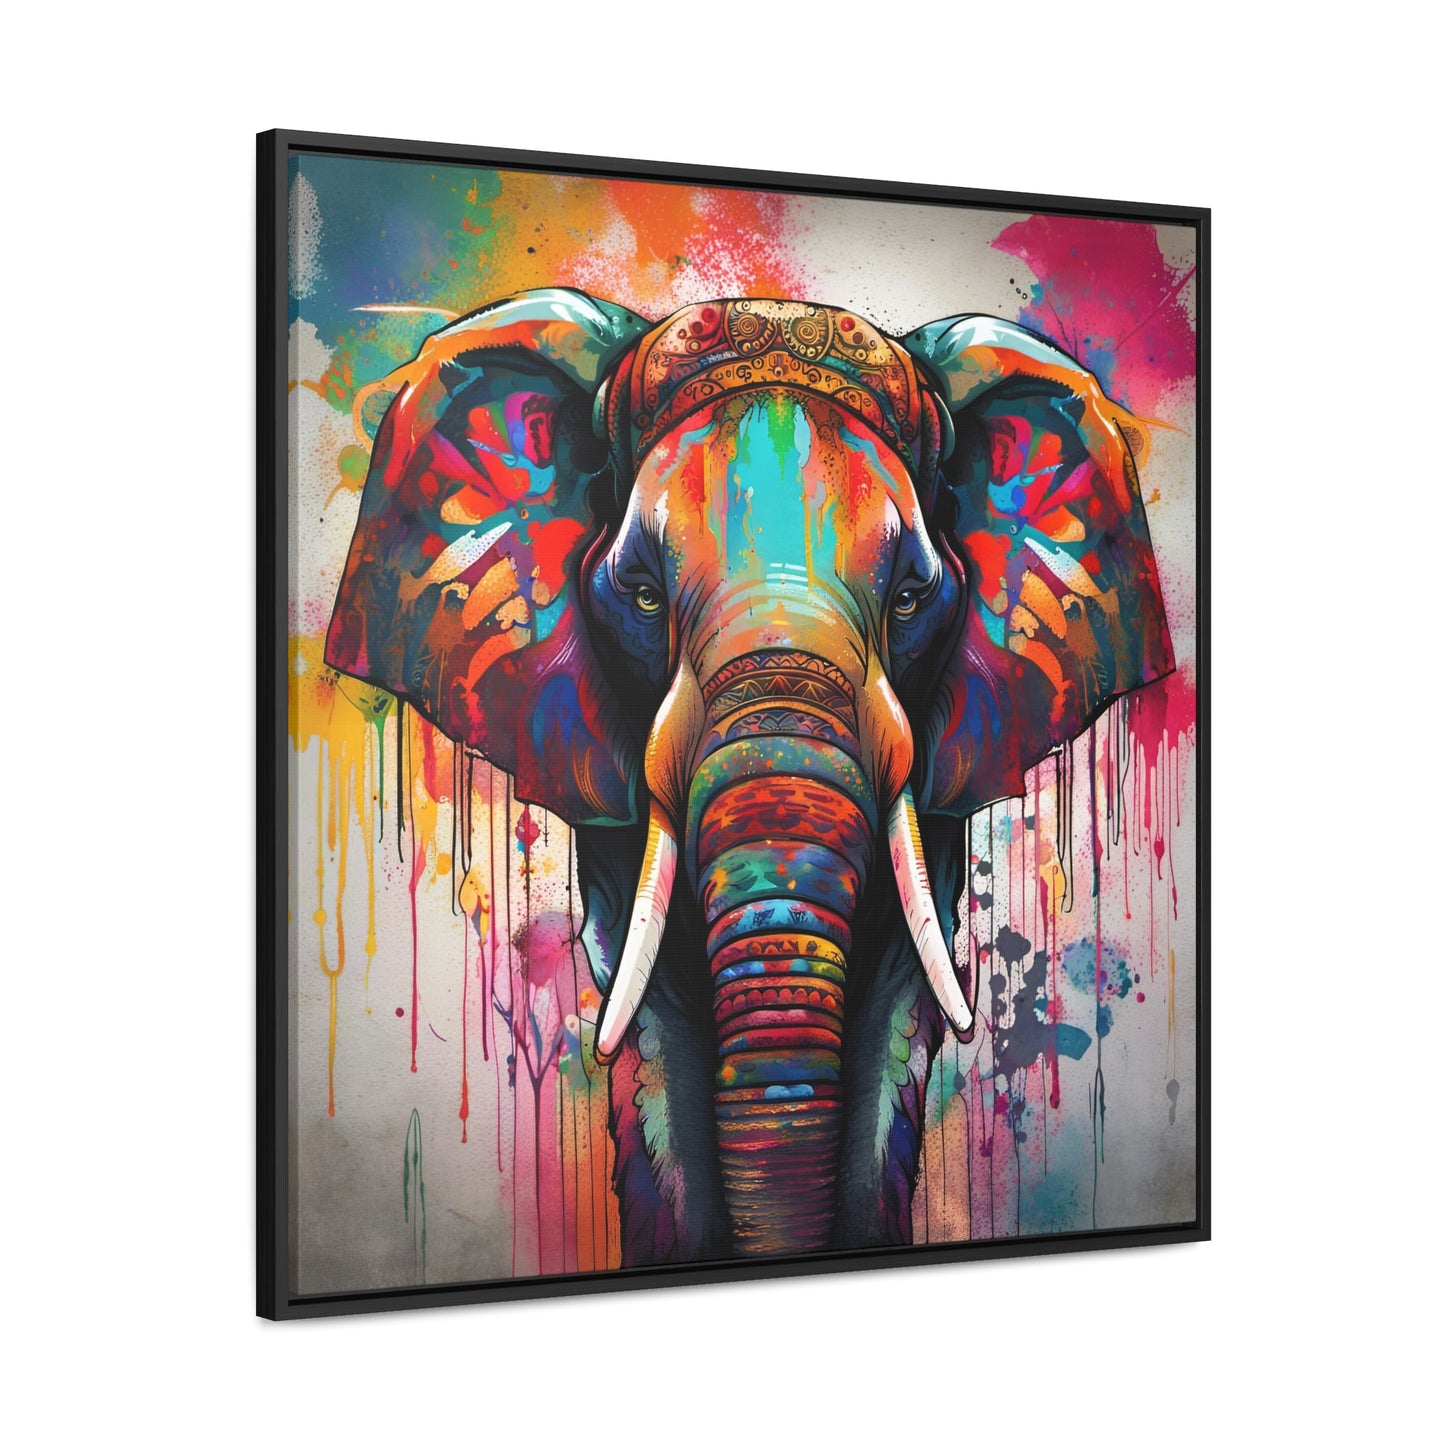 Elephant themed Wall Art Print - Dripping Colors Indian Elephant Print on Canvas in a Floating Frame